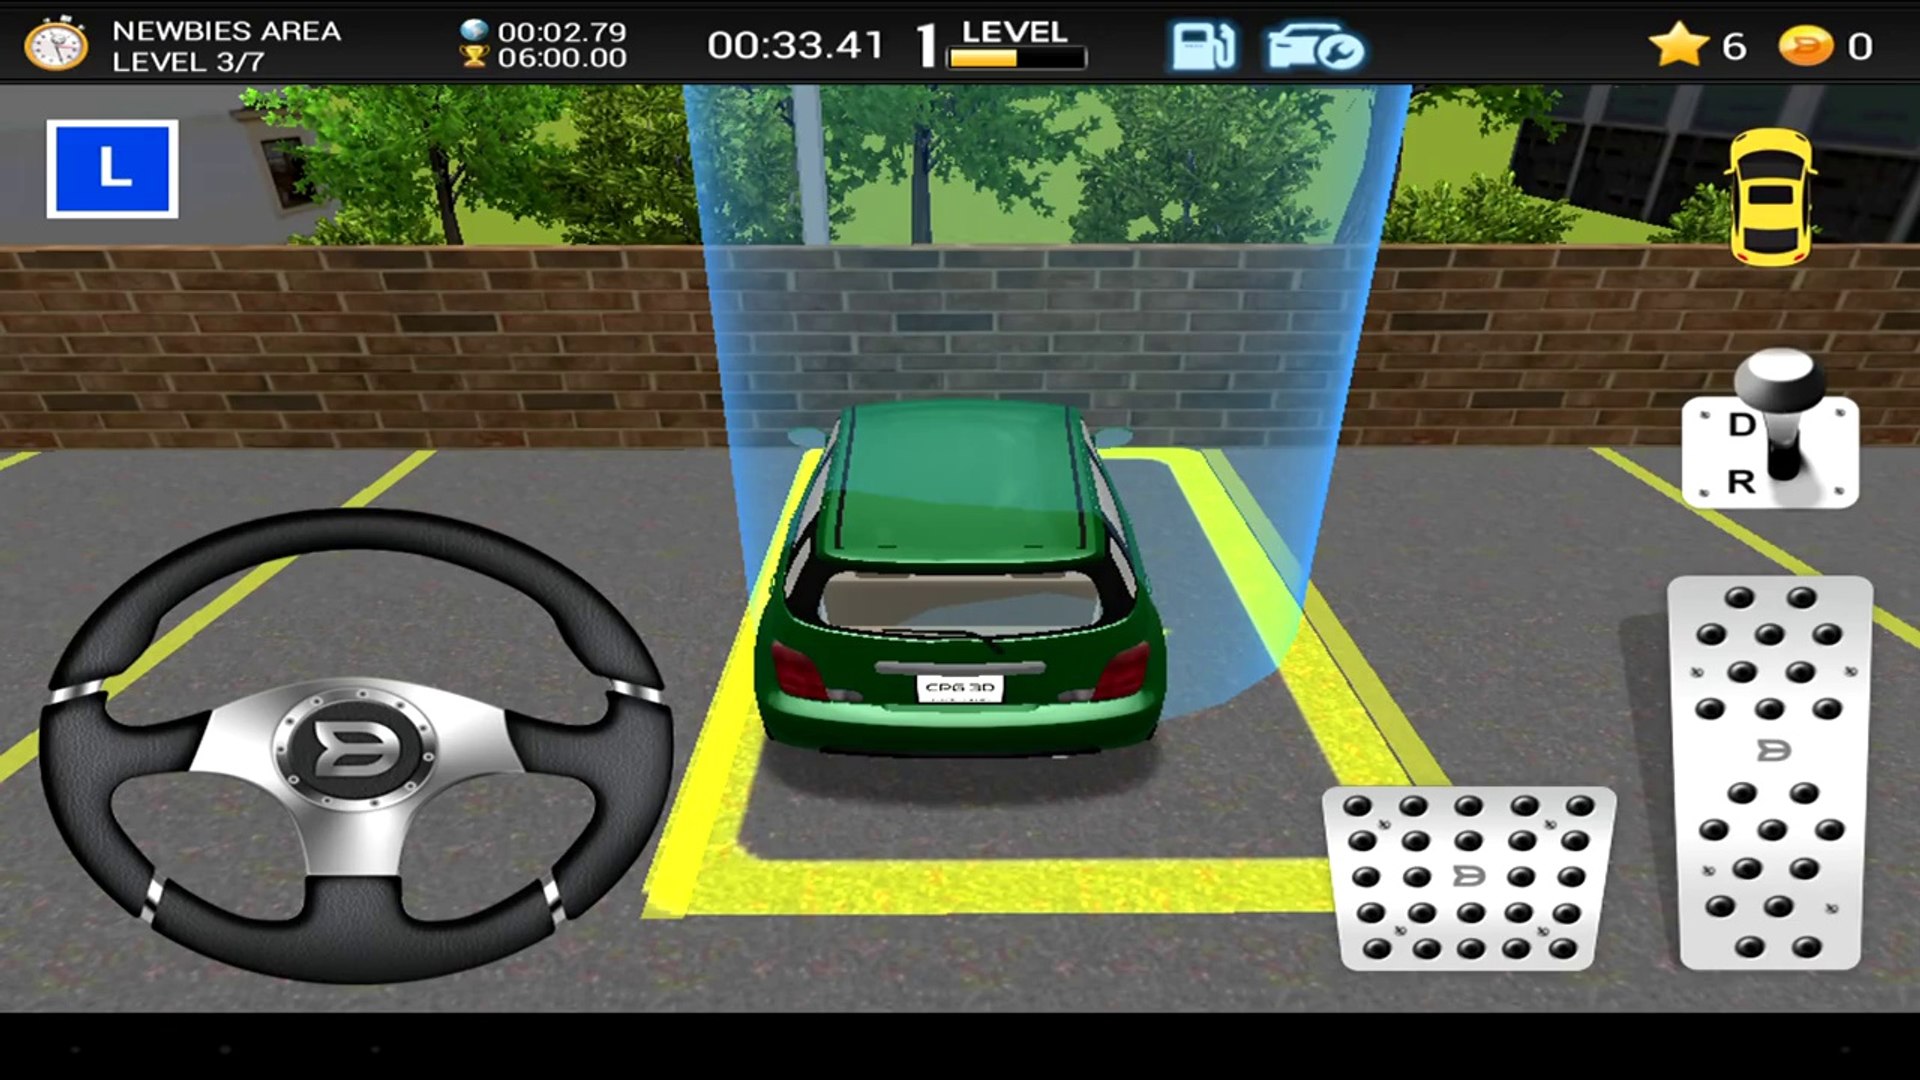 Parking Frenzy 2.0 3D Game #10 - Car Games Android IOS gameplay #carsgames  